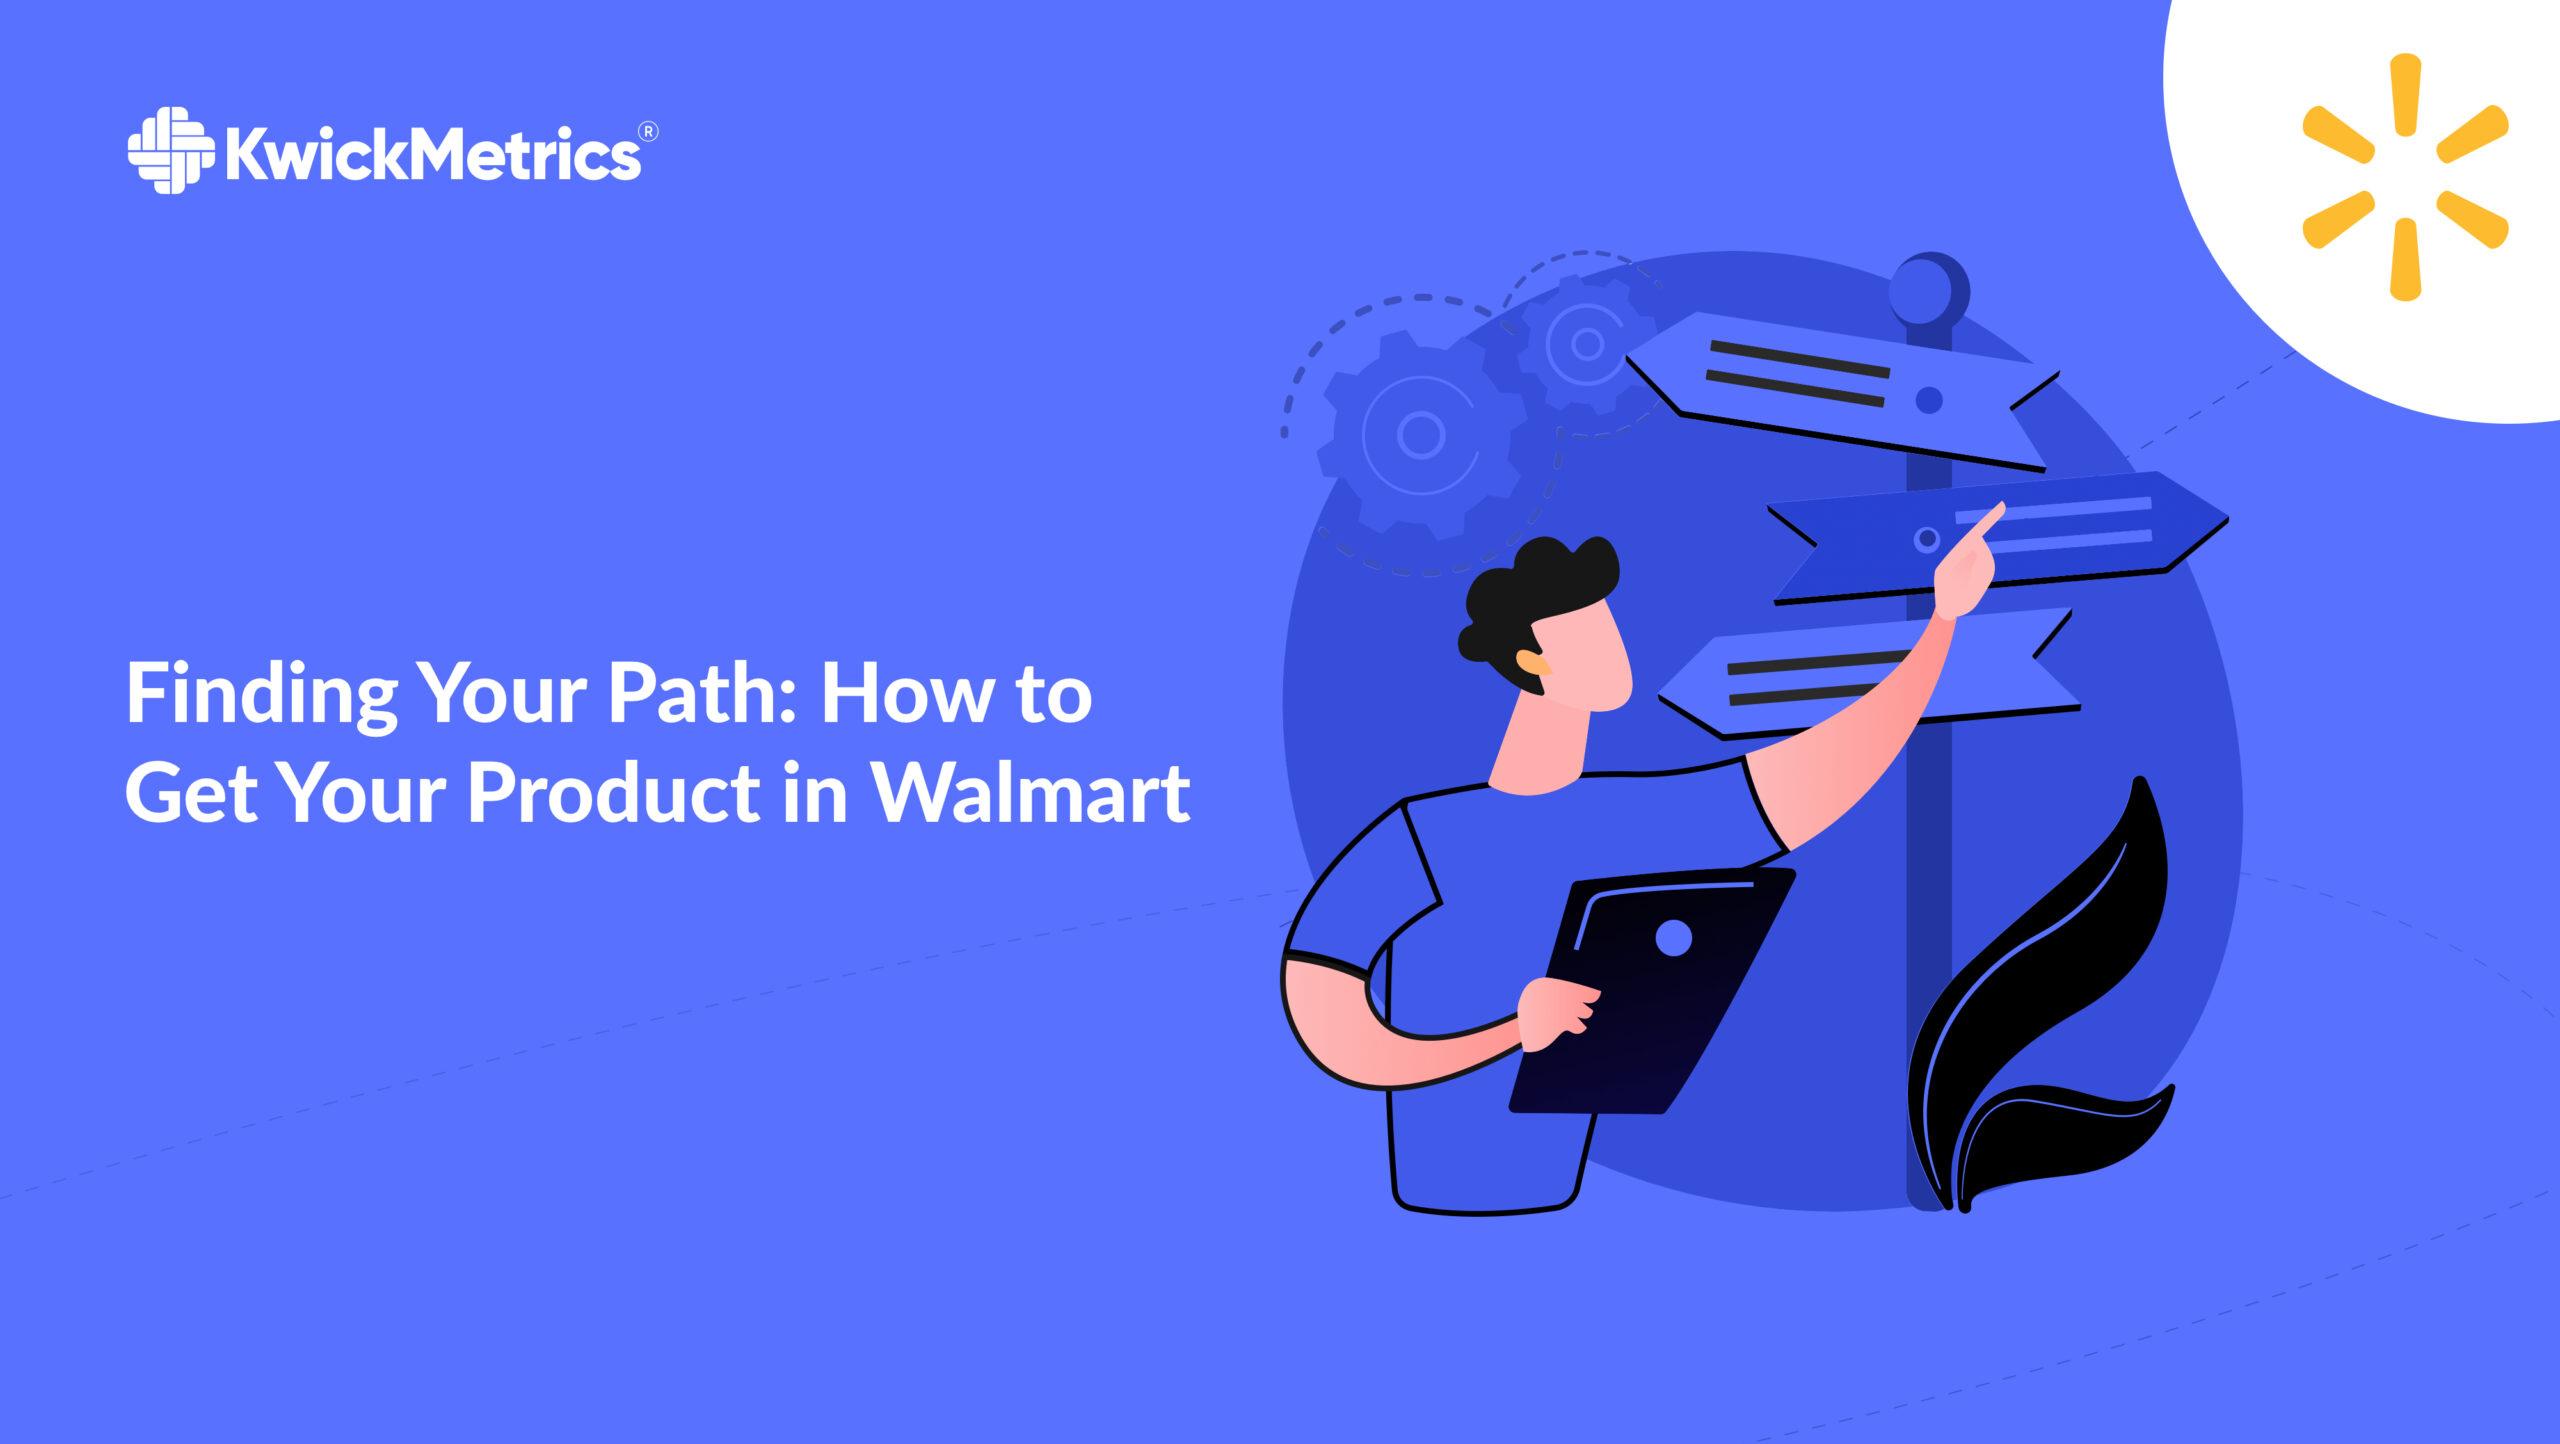 Finding Your Path: How to Get Your Product in Walmart